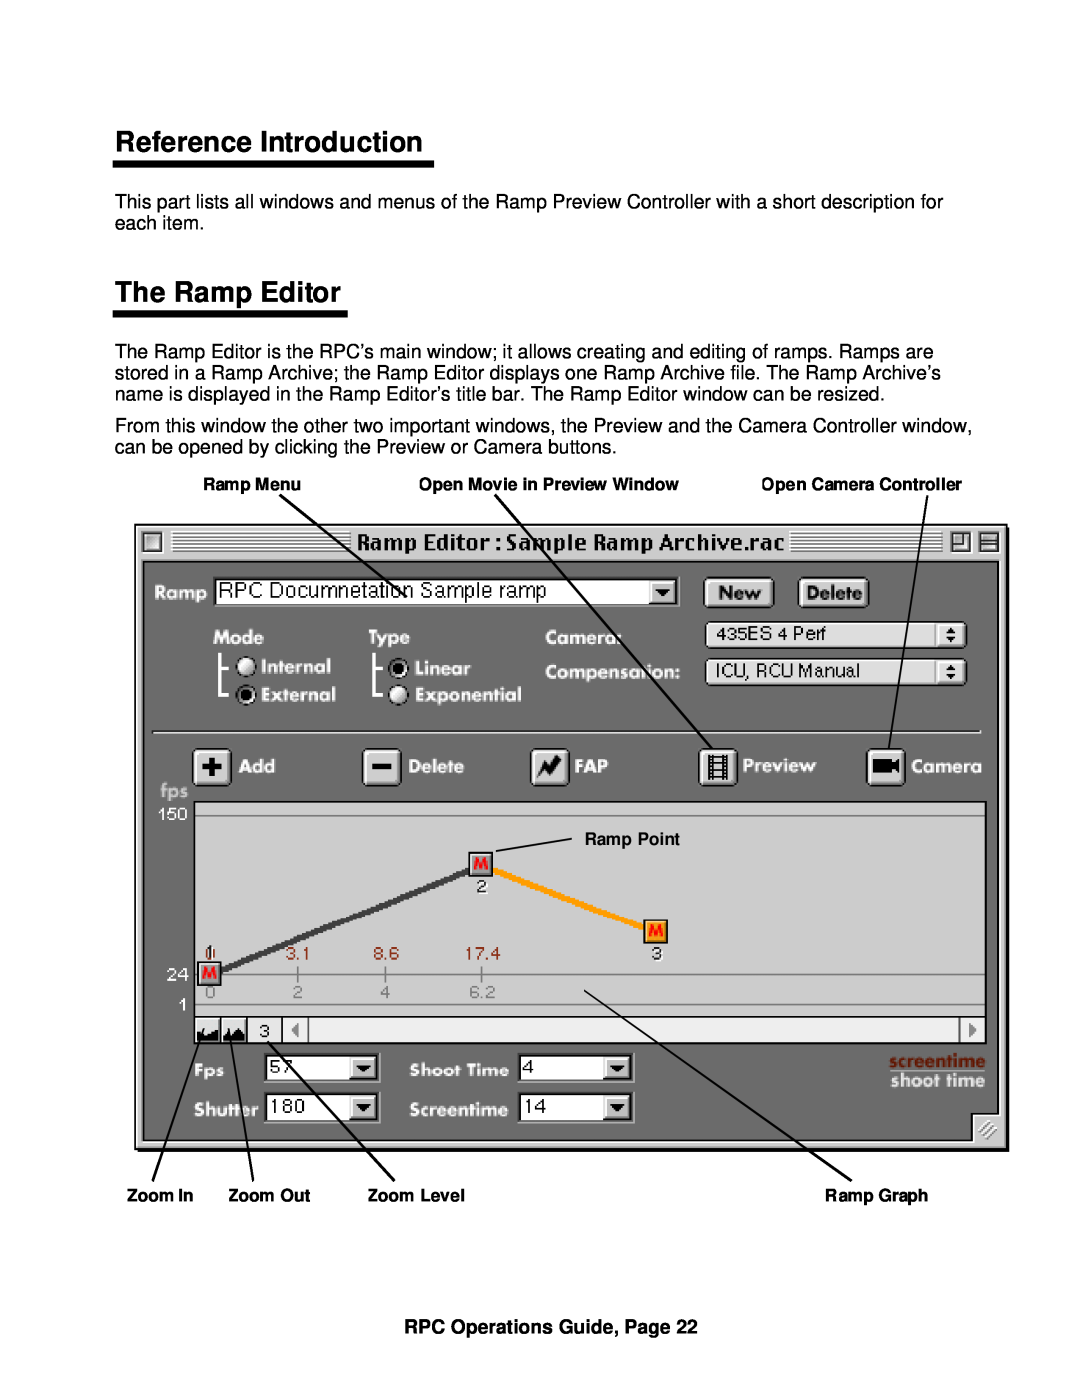 ARRI ARRI Ramp Preview Controller manual Reference Introduction, The Ramp Editor, RPC Operations Guide, Page, Ramp Menu 